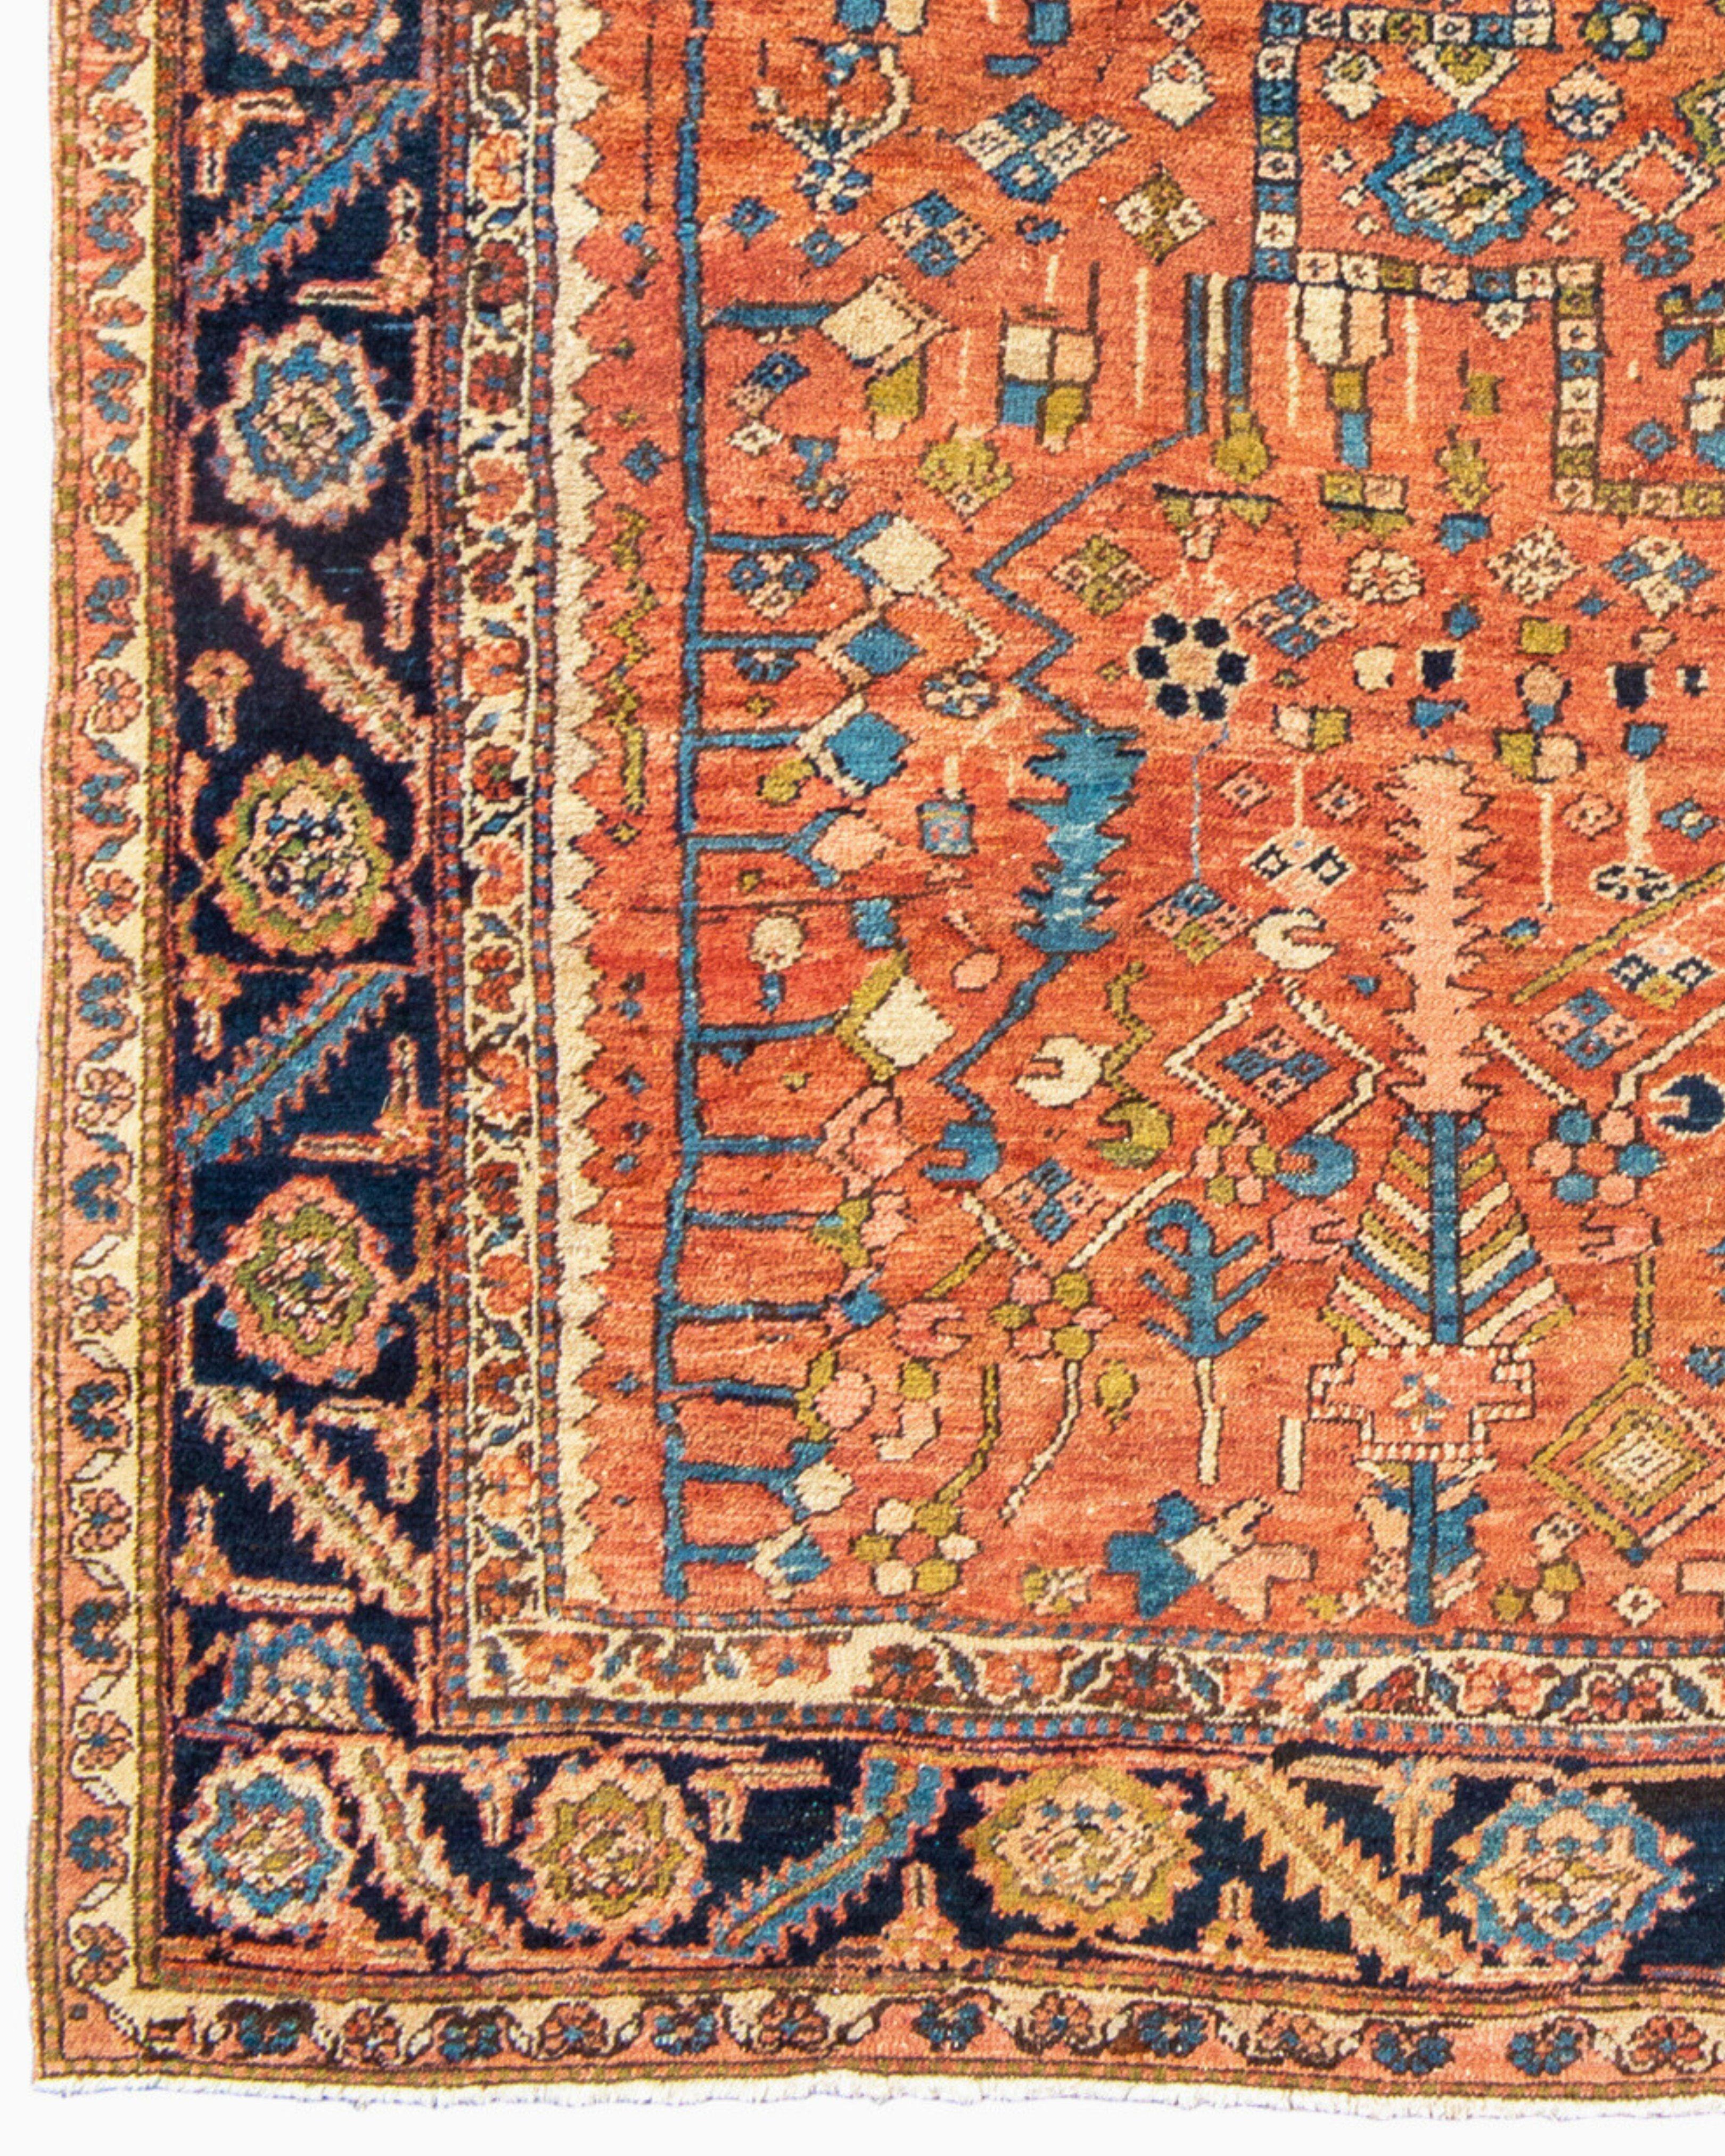 Antique Persian Bakhshaish Carpet, c. 1900 In Good Condition For Sale In San Francisco, CA